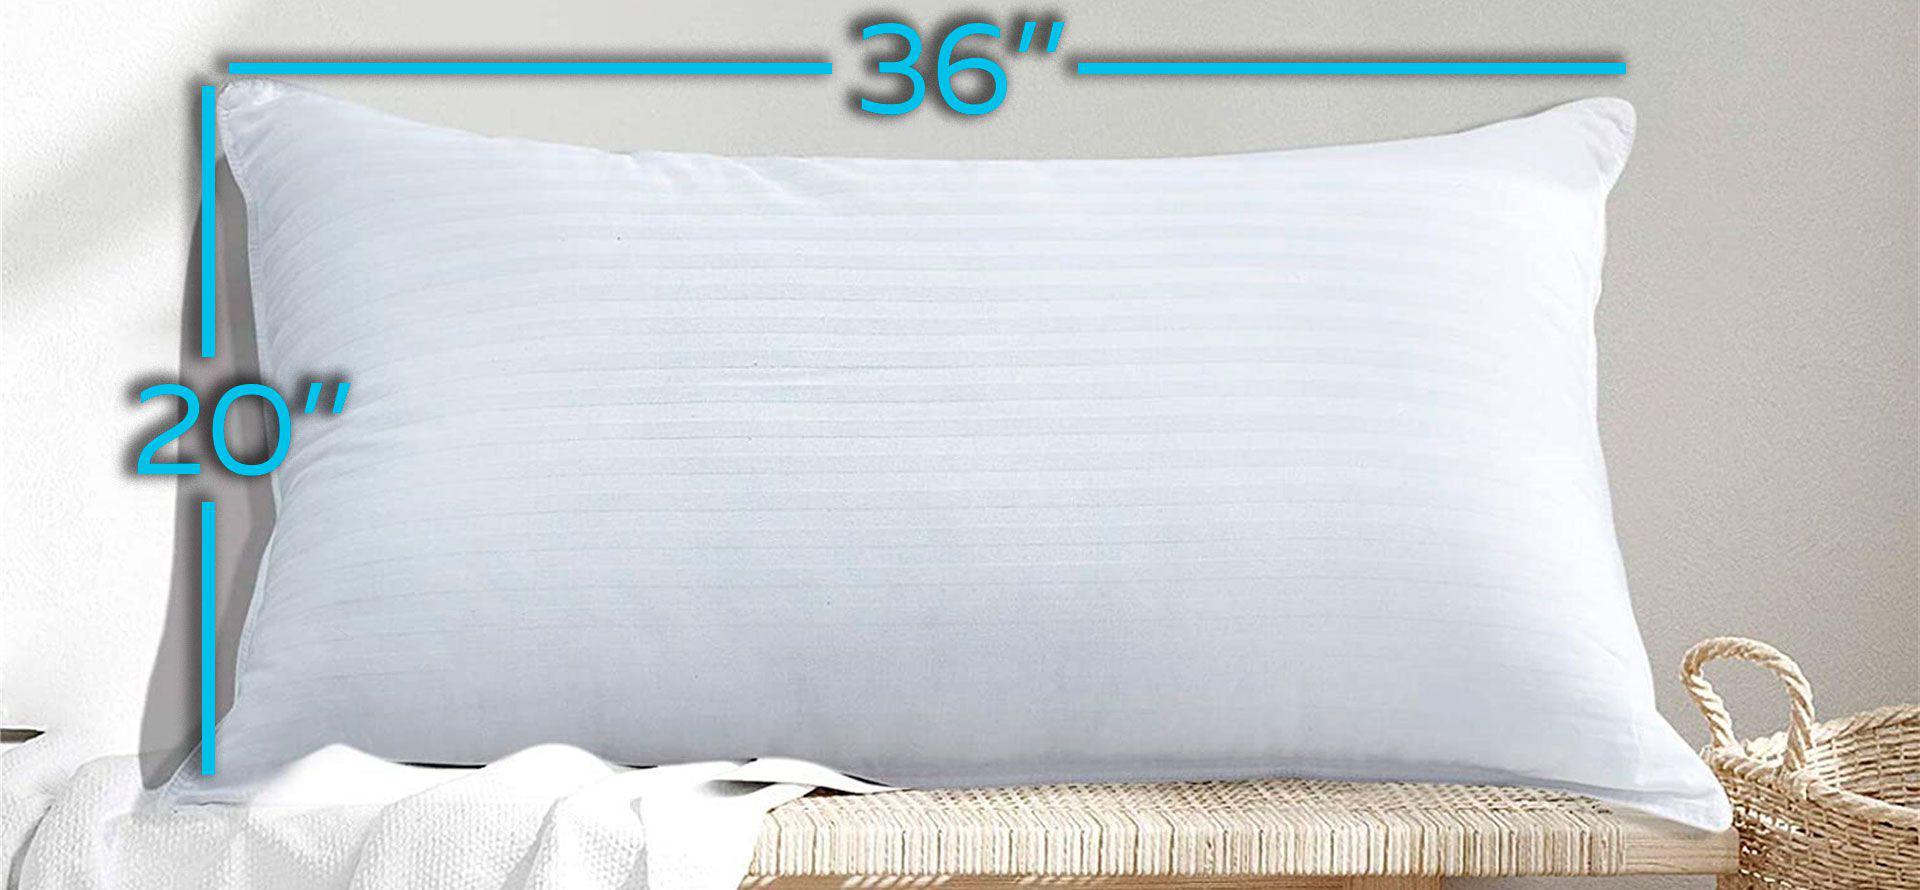 King size pillow dimensions.